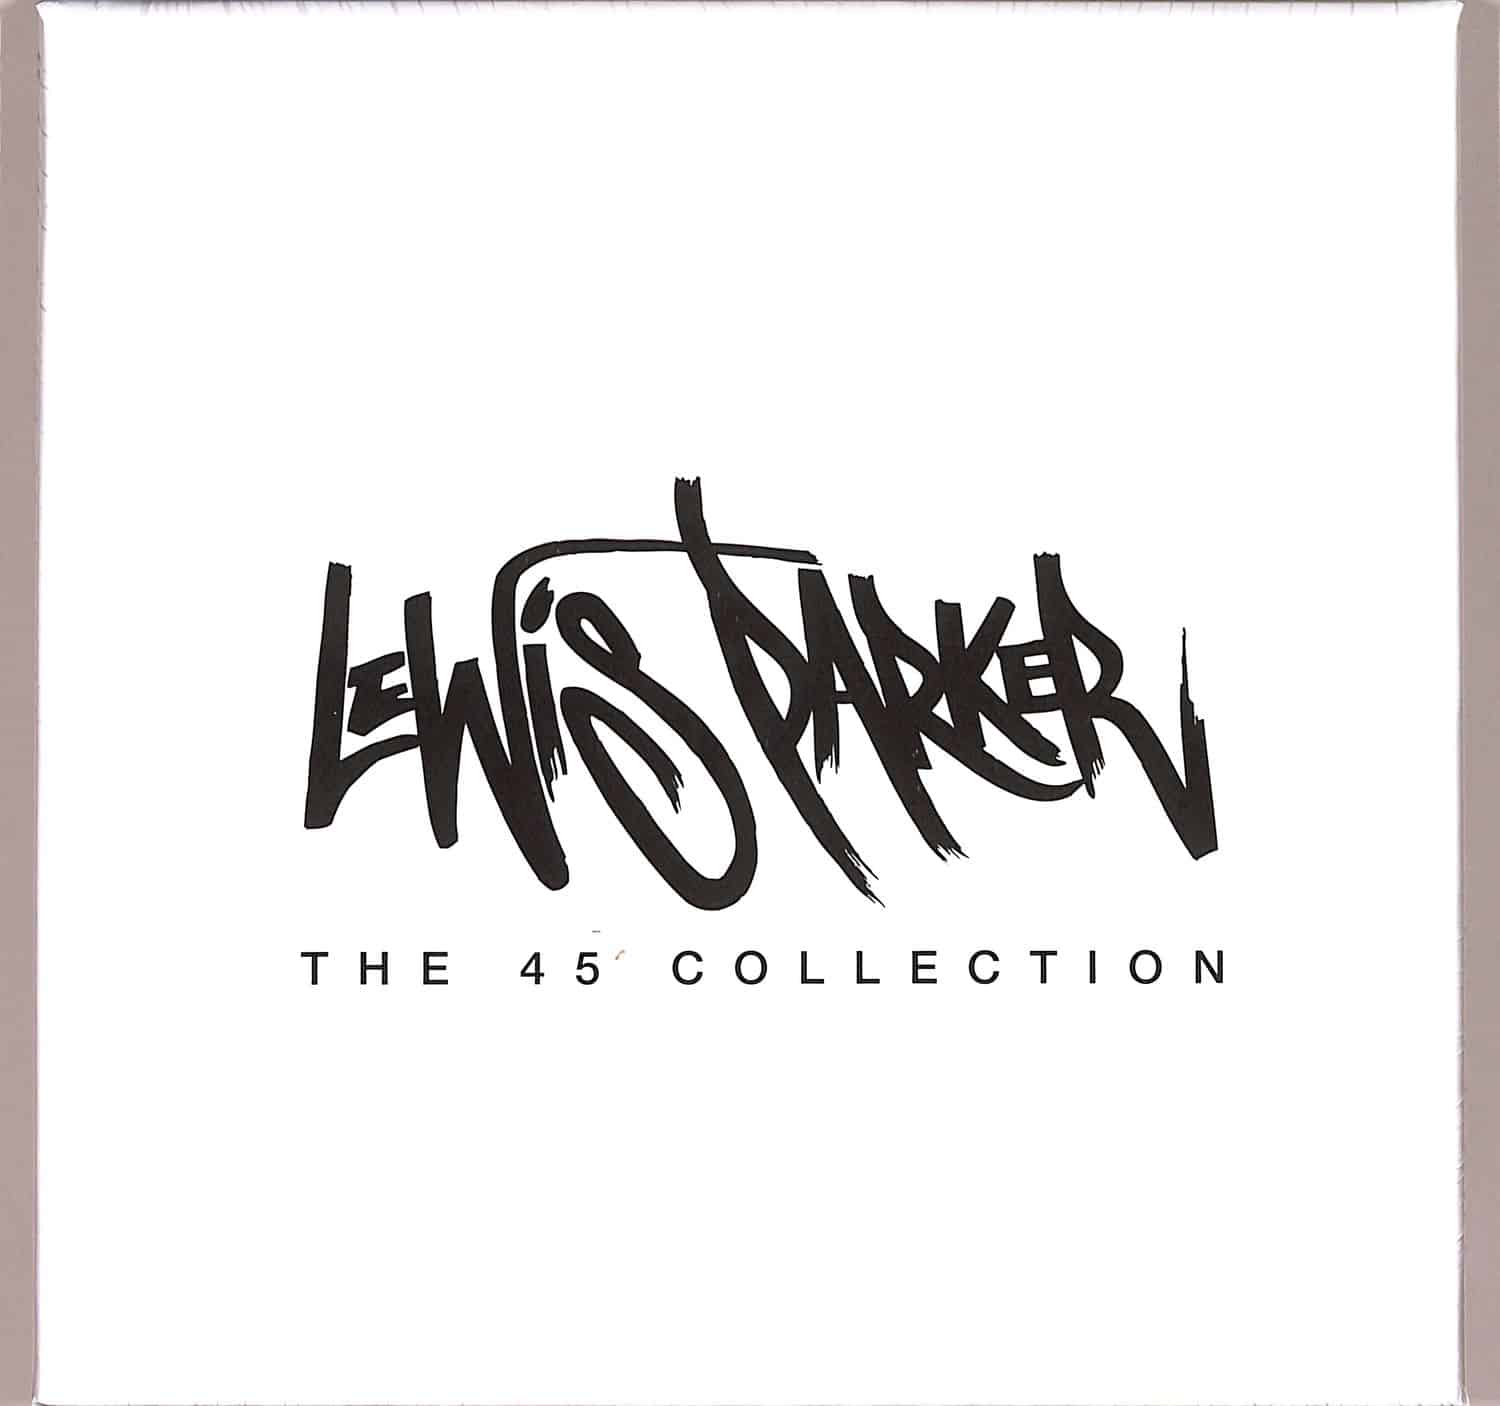 Lewis Parker - THE 45 COLLECTION 